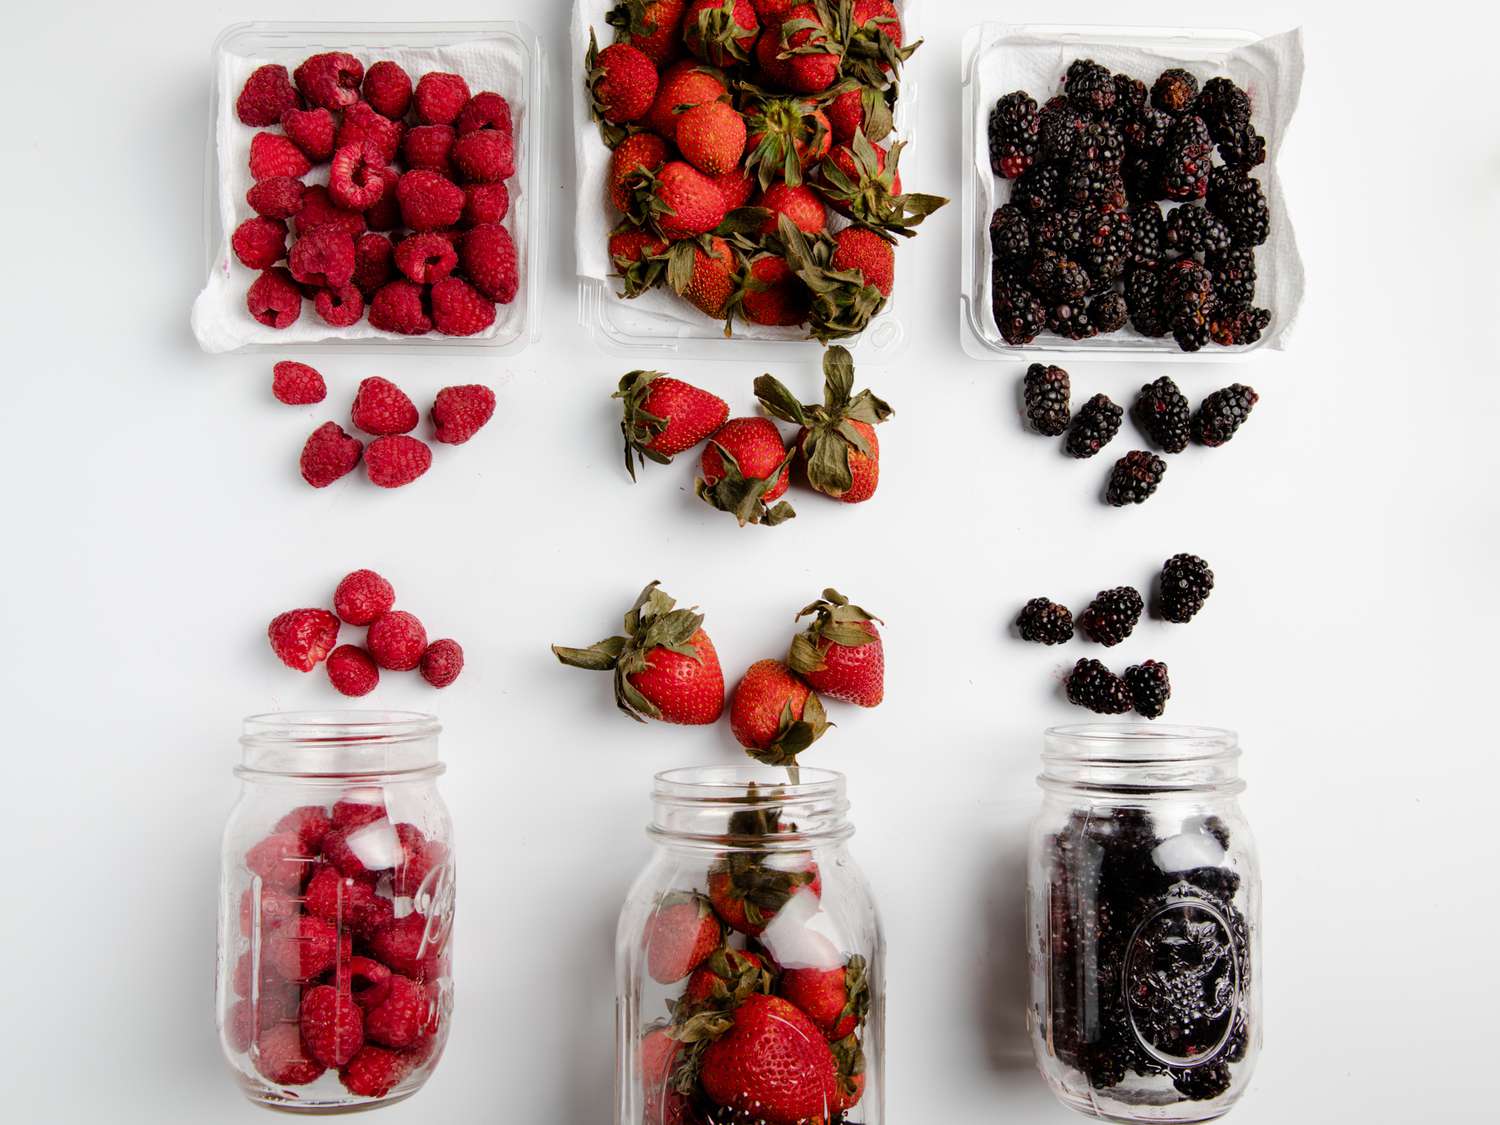 How To Store Berries